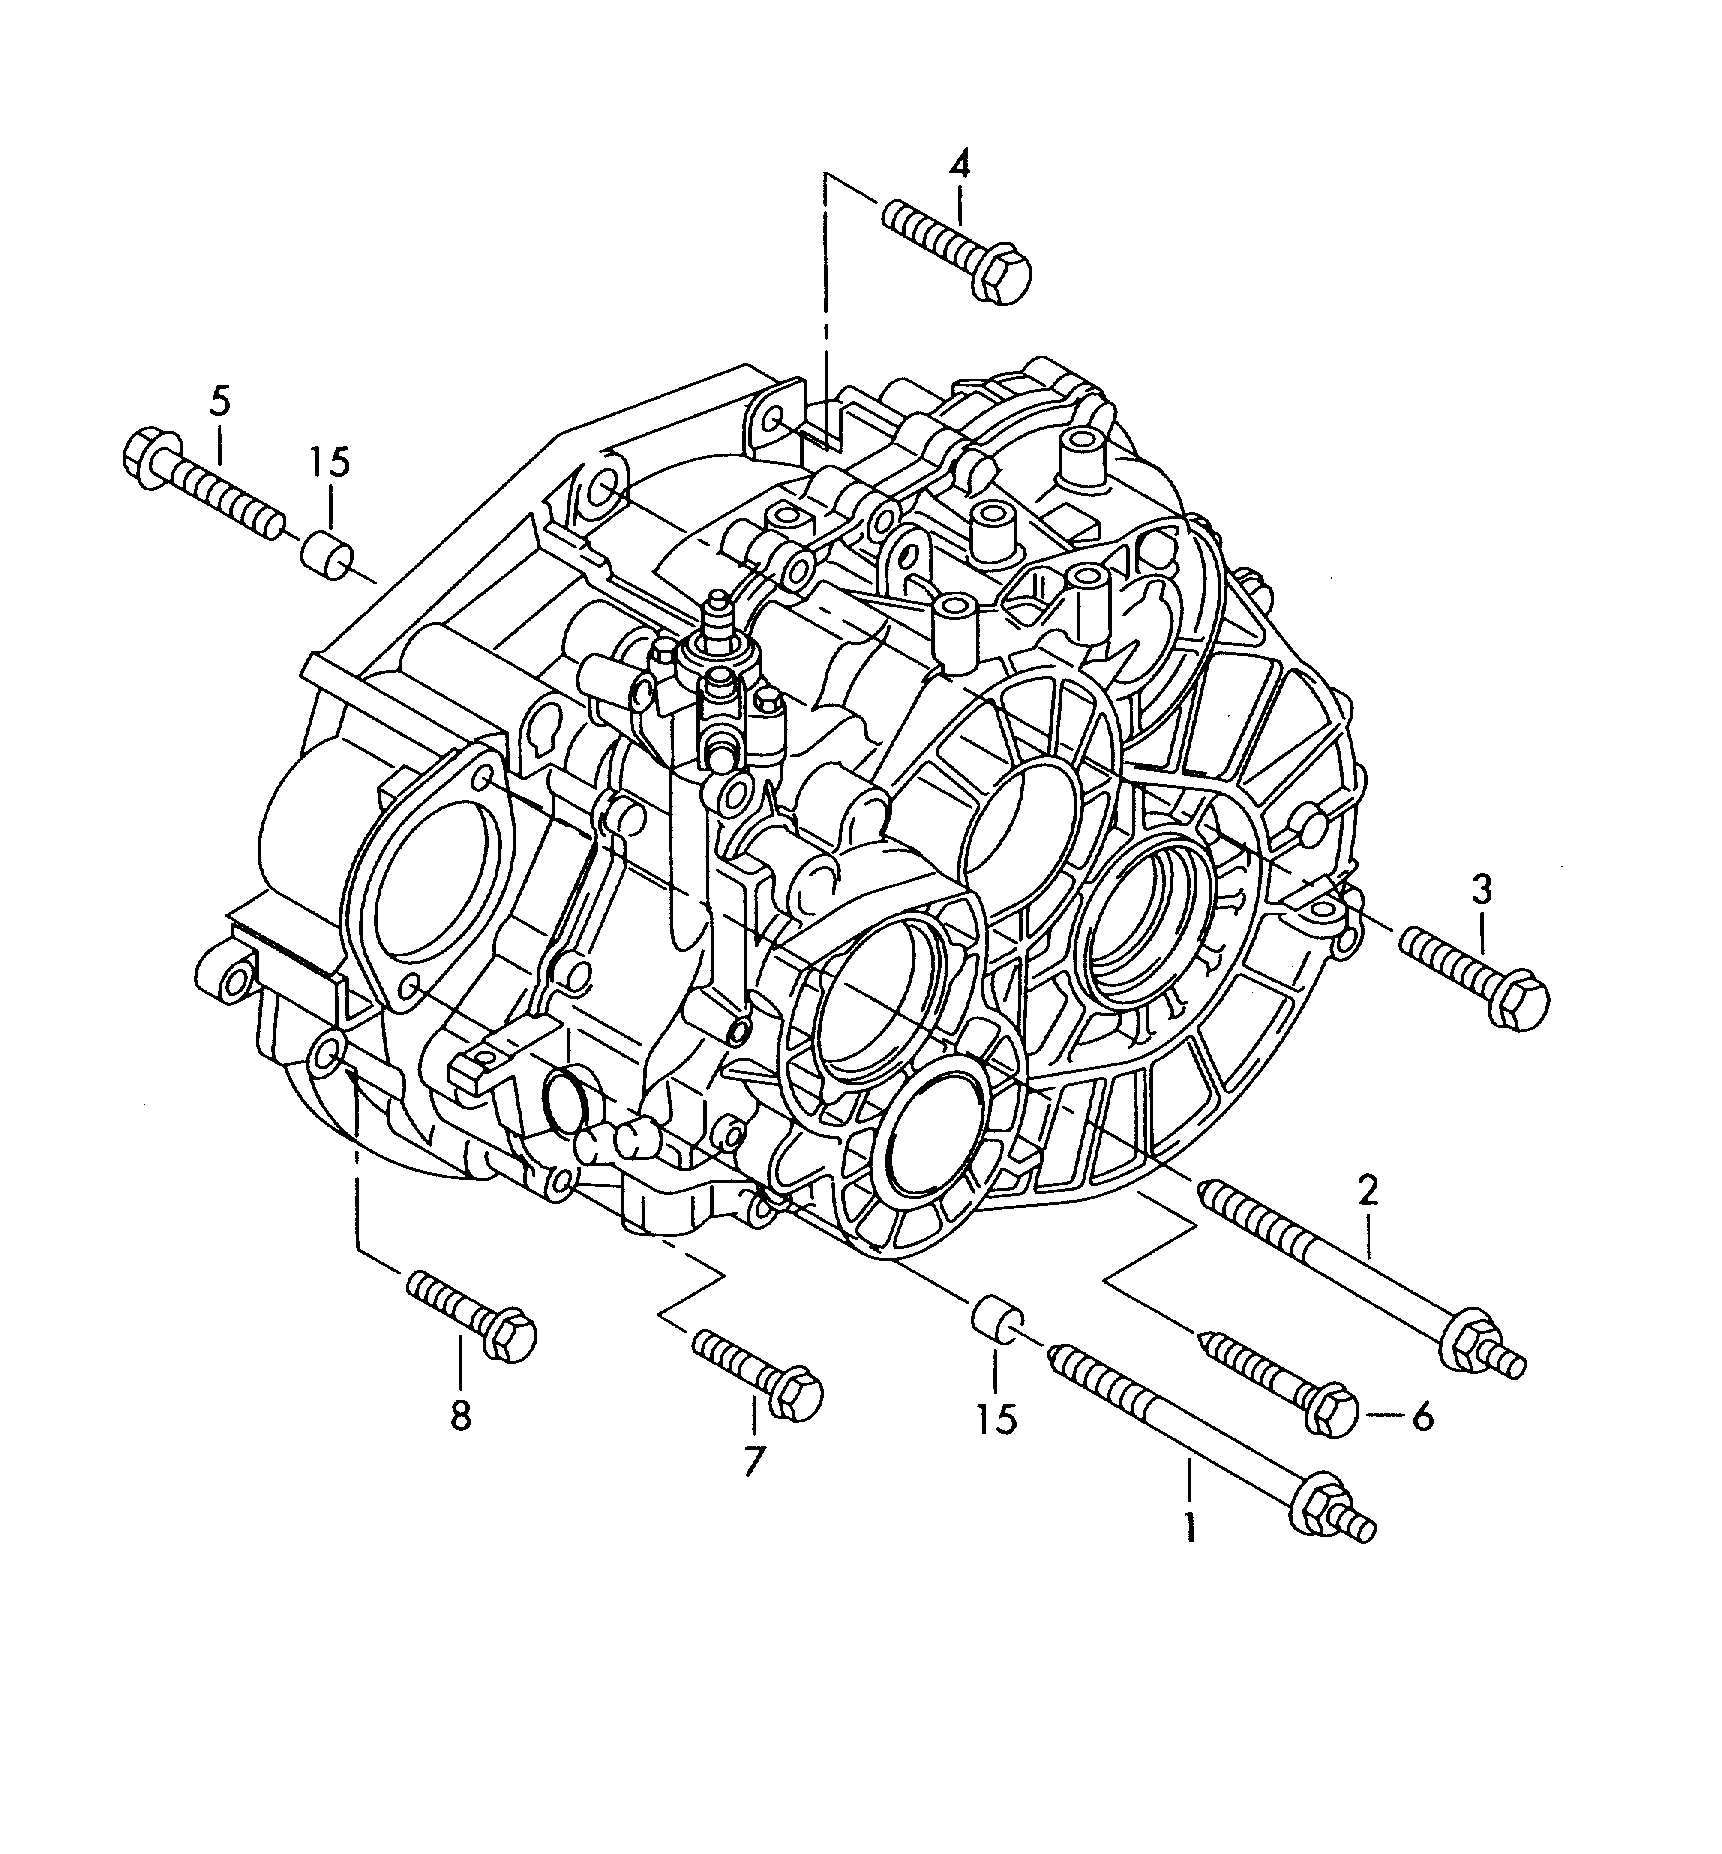 mounting parts for engine and<br>transmissionfor 6 speed manual gearbox MQ500 - Sharan/syncro/4Motion - sha